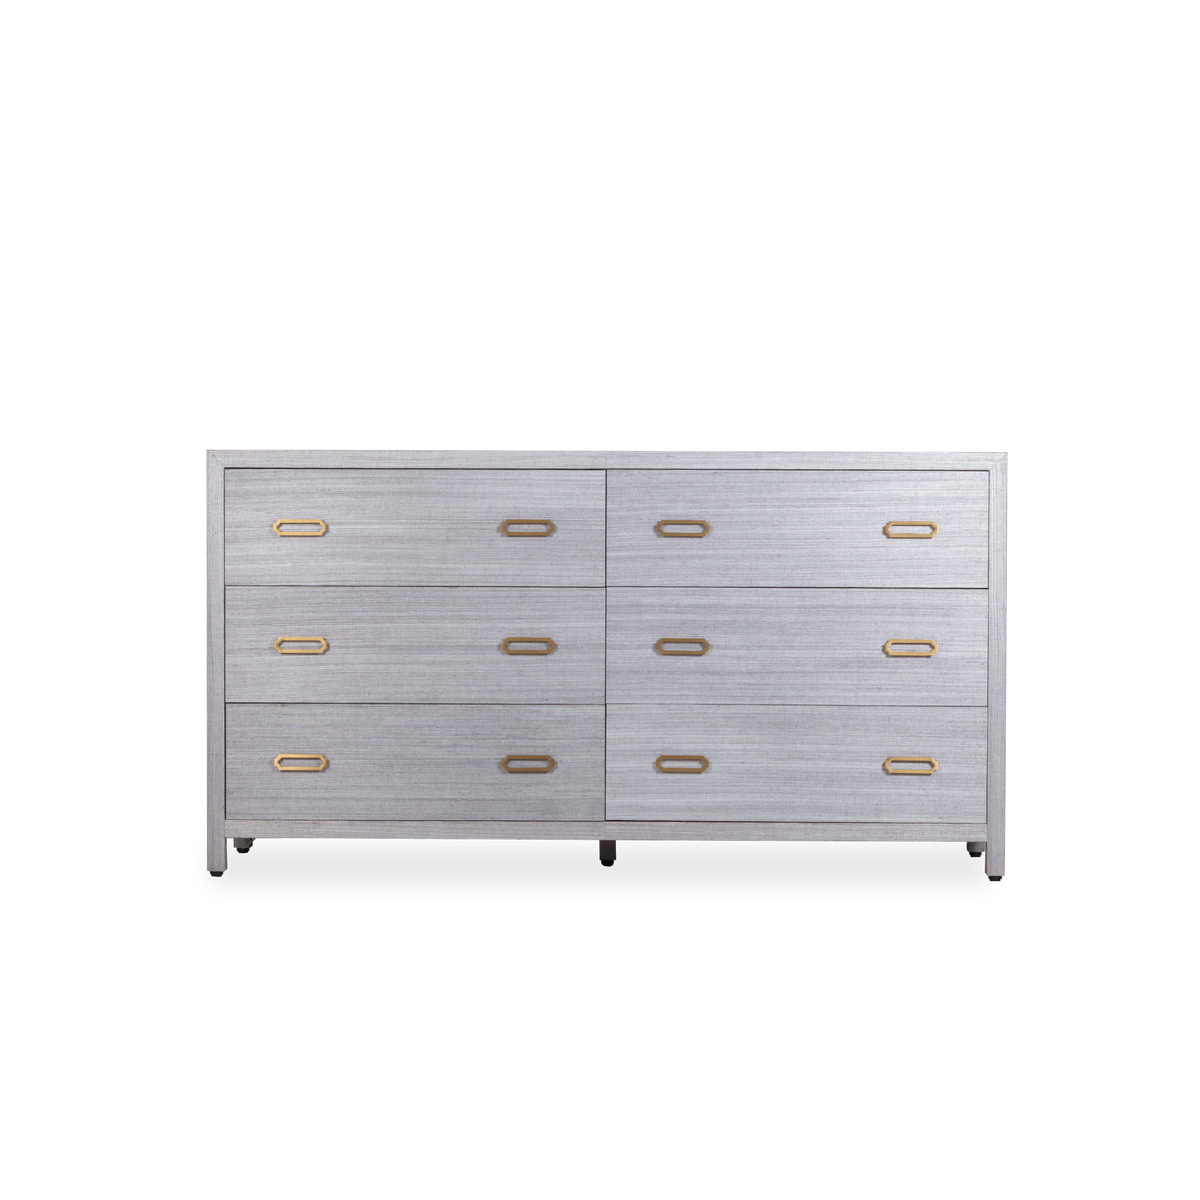 Elegant and refined, the Ariel 6-Drawer Dresser introduces warmth and texture for a luxe coastal vibe.